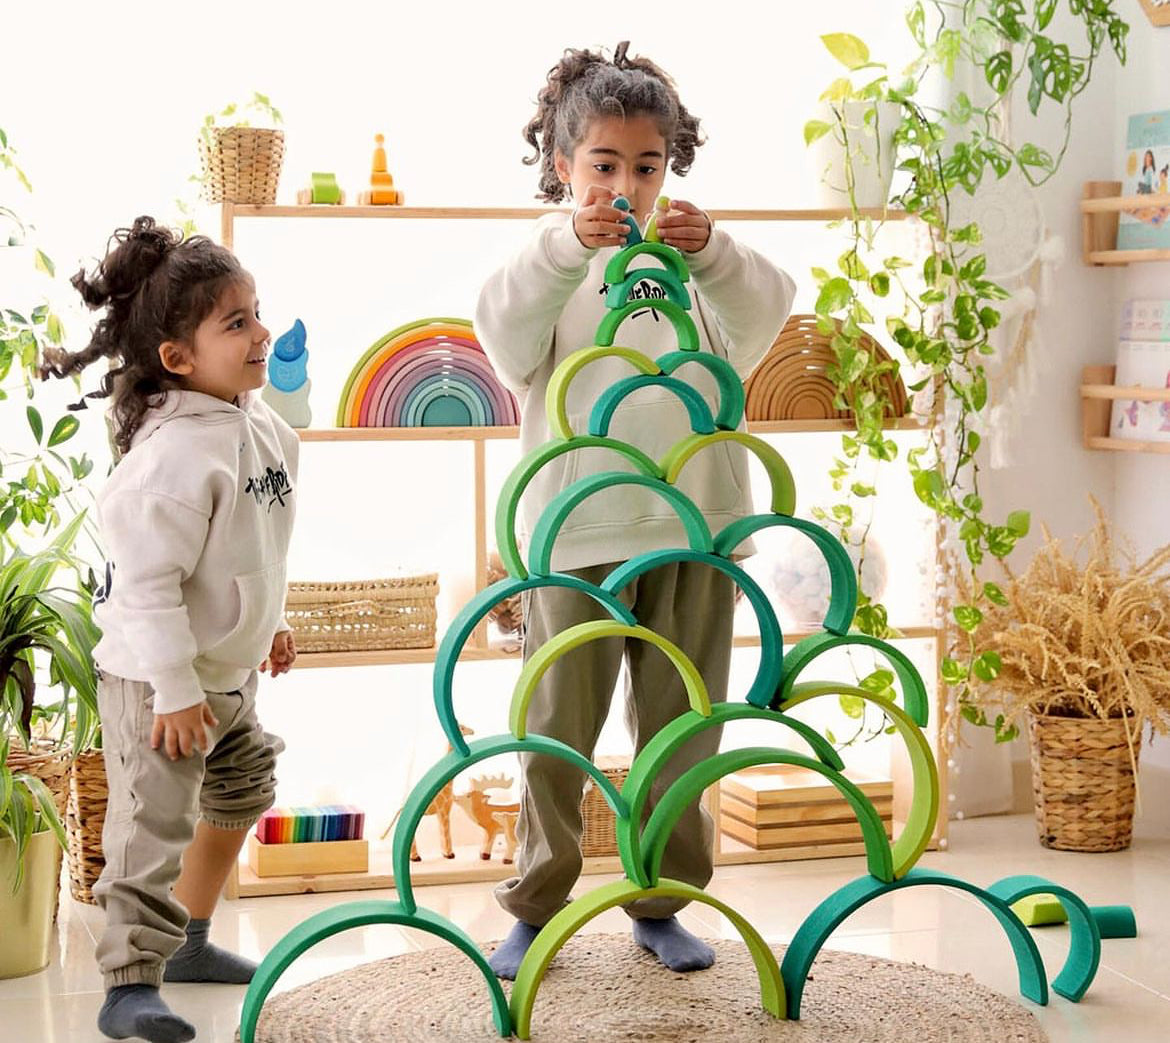 Wooden Toy - GREEN RAINBOW TUNNEL, 2 choices, 12 pieces each!